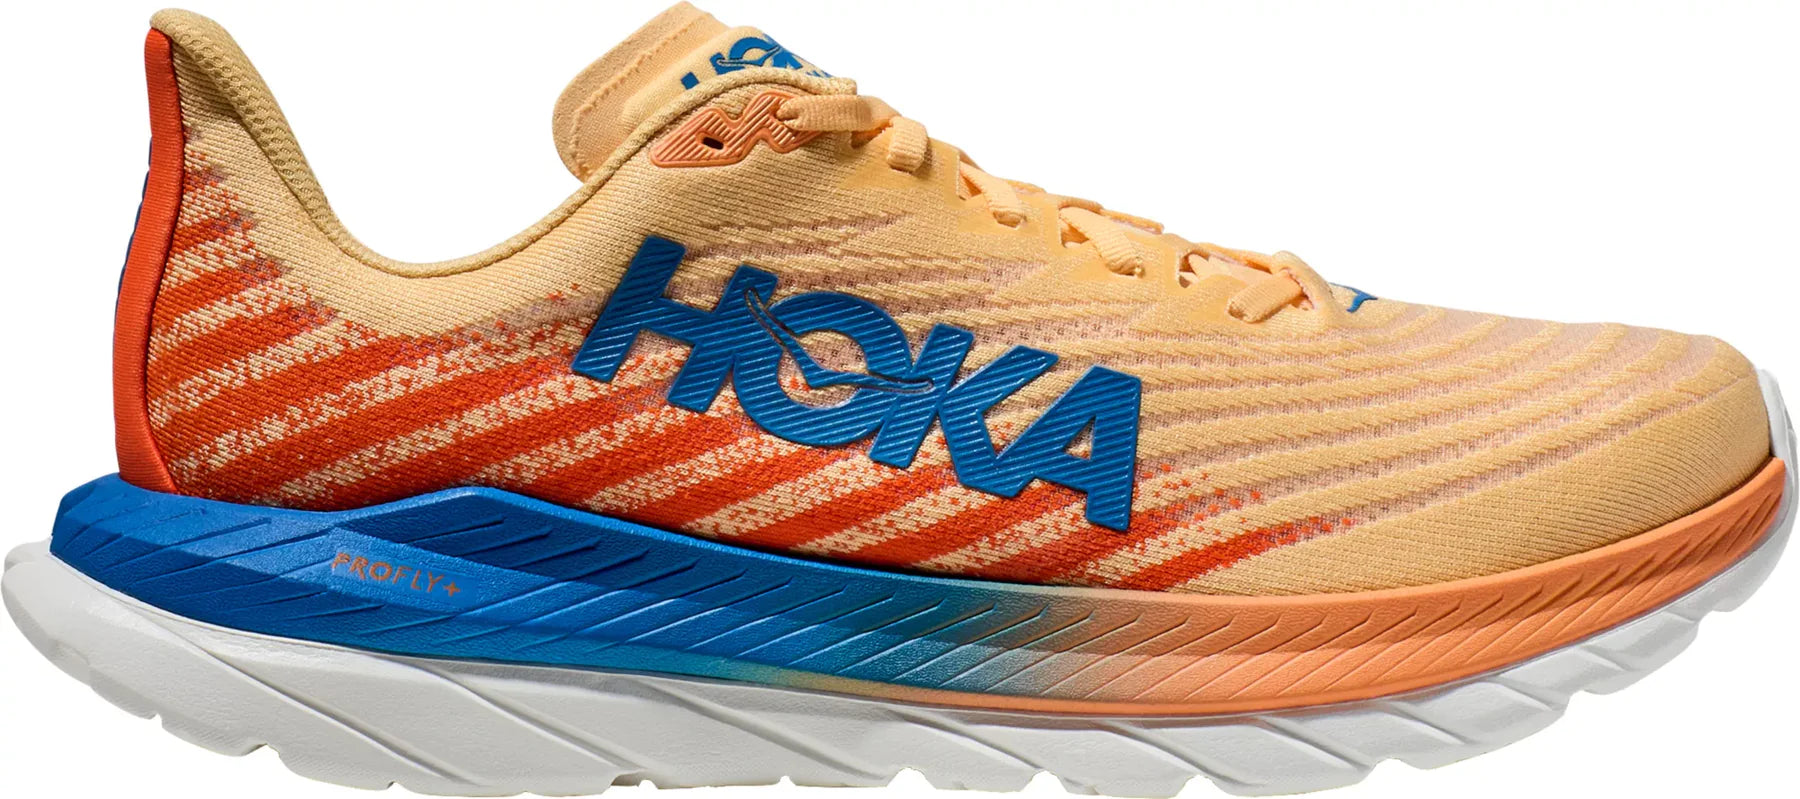 Lateral view of the Men's HOKA Mach 5 in the color Impala/Vibrant Orange